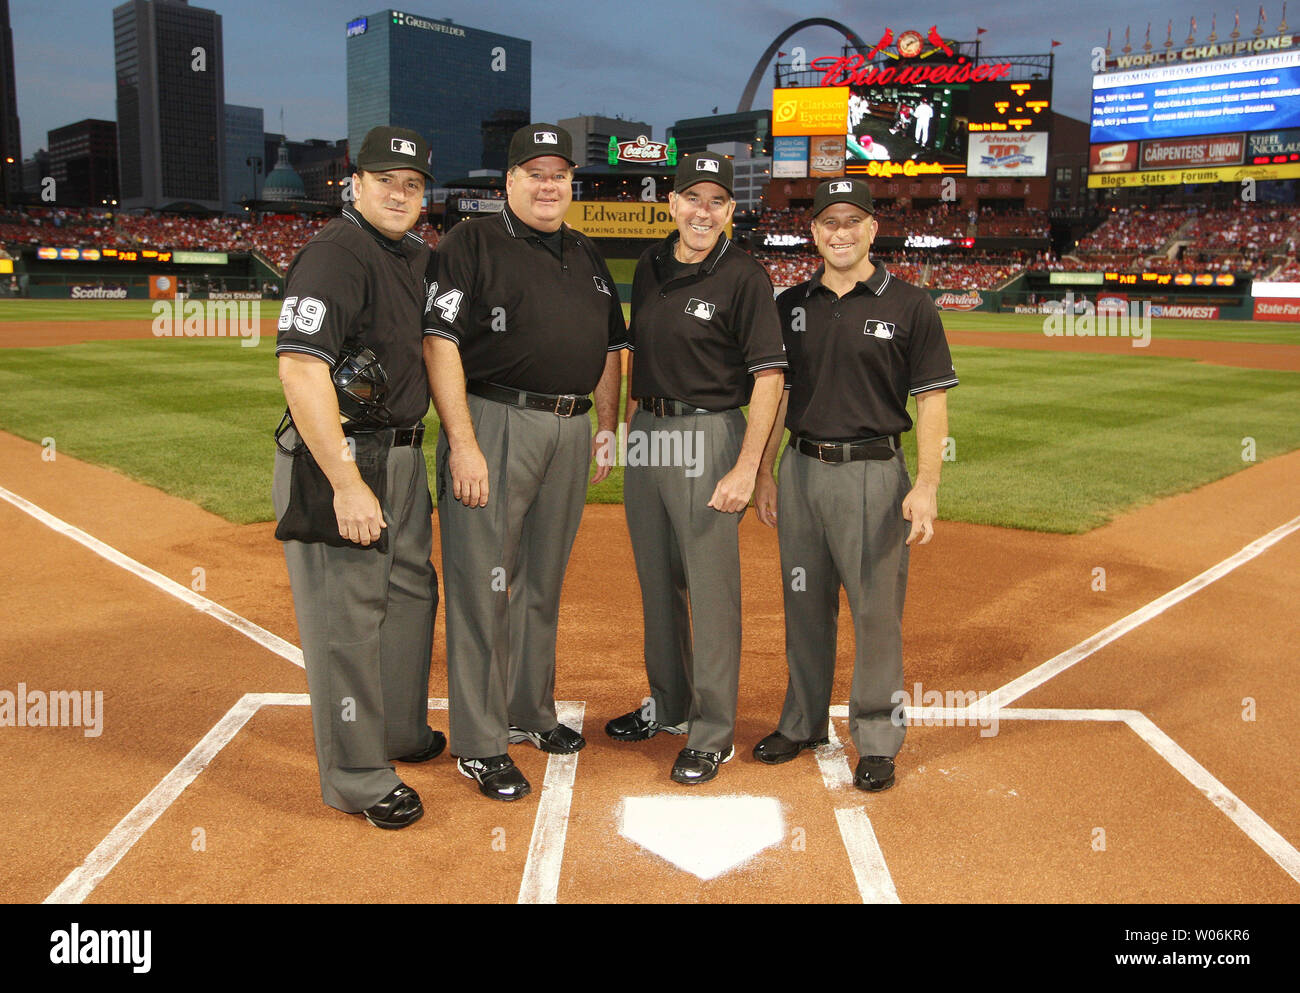 Umpires (L to R) Tony Randazzo, Jerry Layne, Mike Winters and Chris Guccione pose for a photograph before the Florida Marlin-St. Louis Cardinals baseball game at Busch Stadium in St. Louis on September 14, 2009.   UPI/Bill Greenblatt Stock Photo